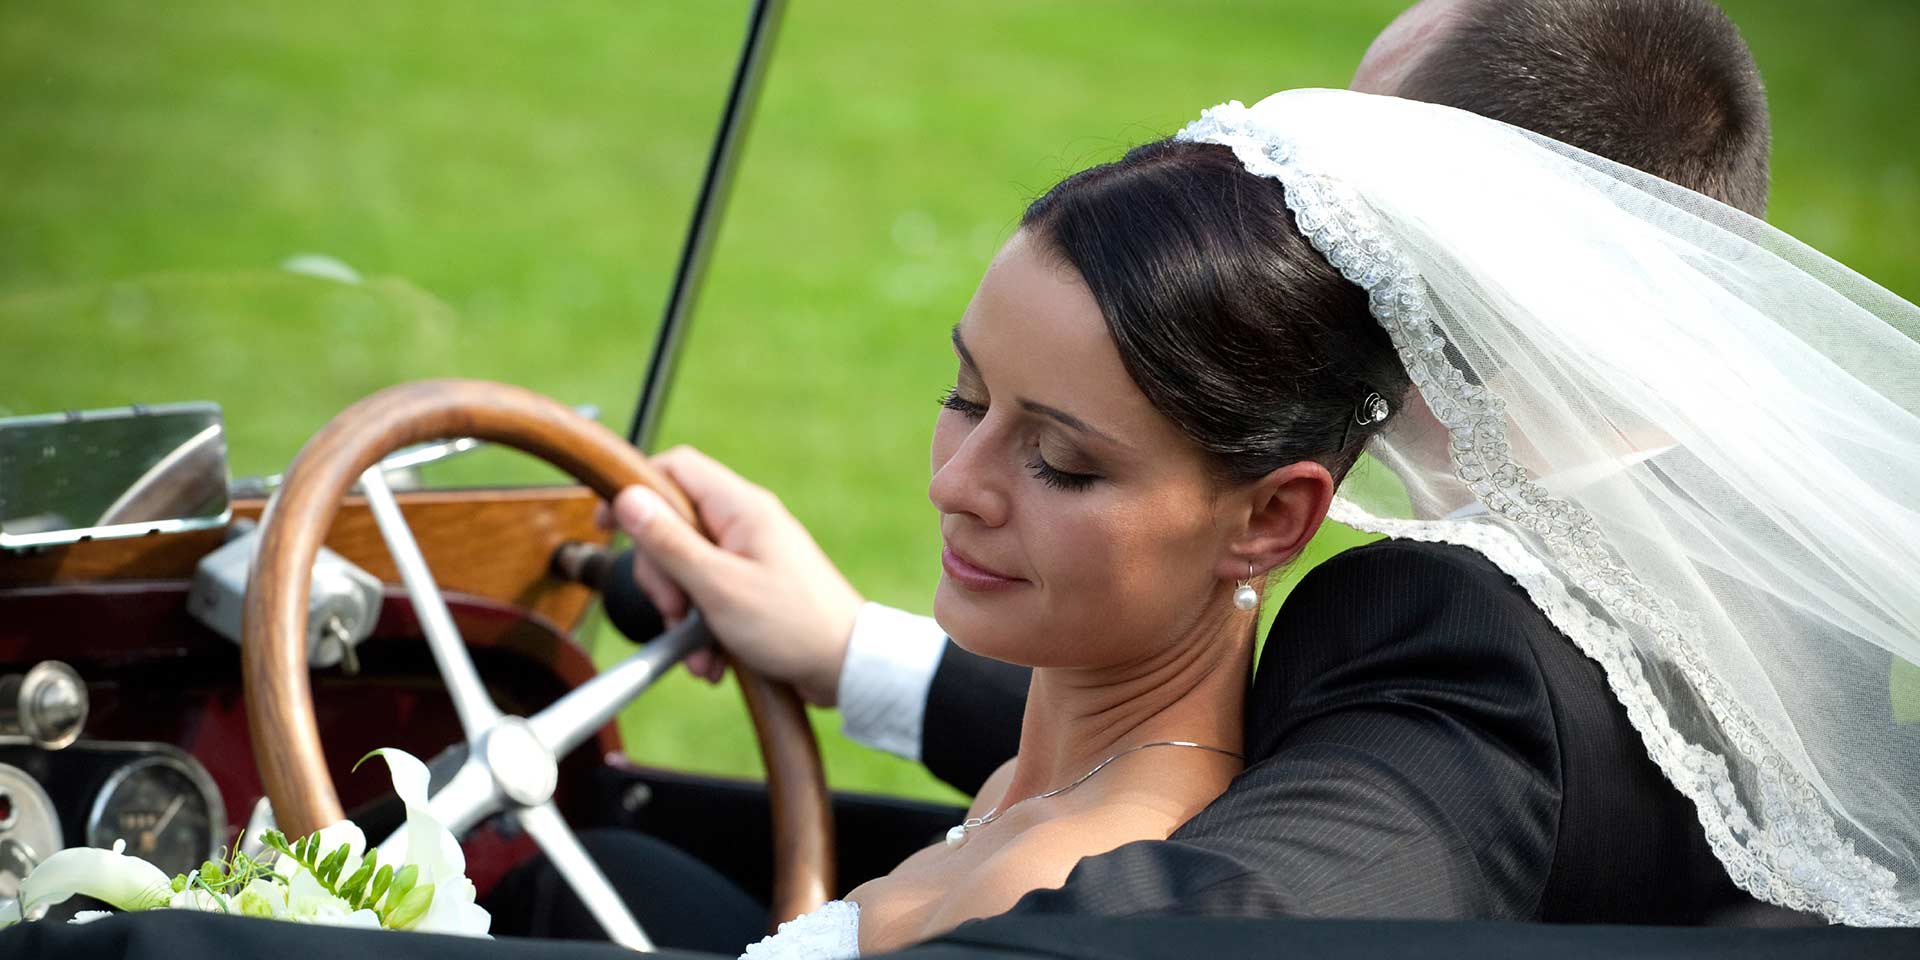 read all about drive-through weddings on our blog!